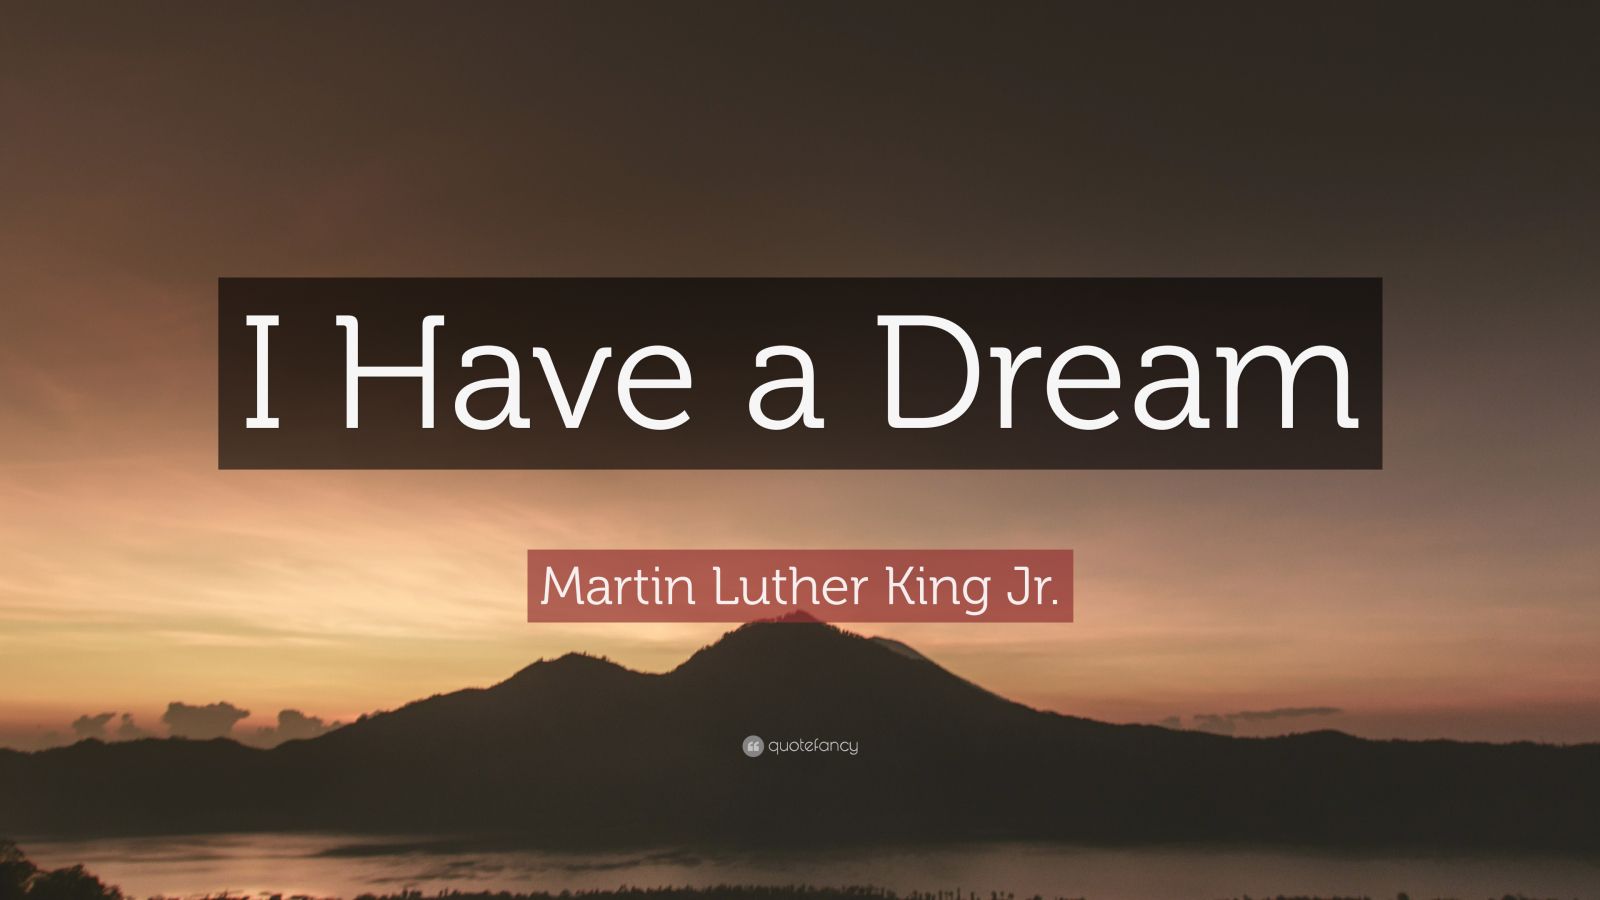 Martin Luther King Jr. Quote: "I Have a Dream" (19 ...